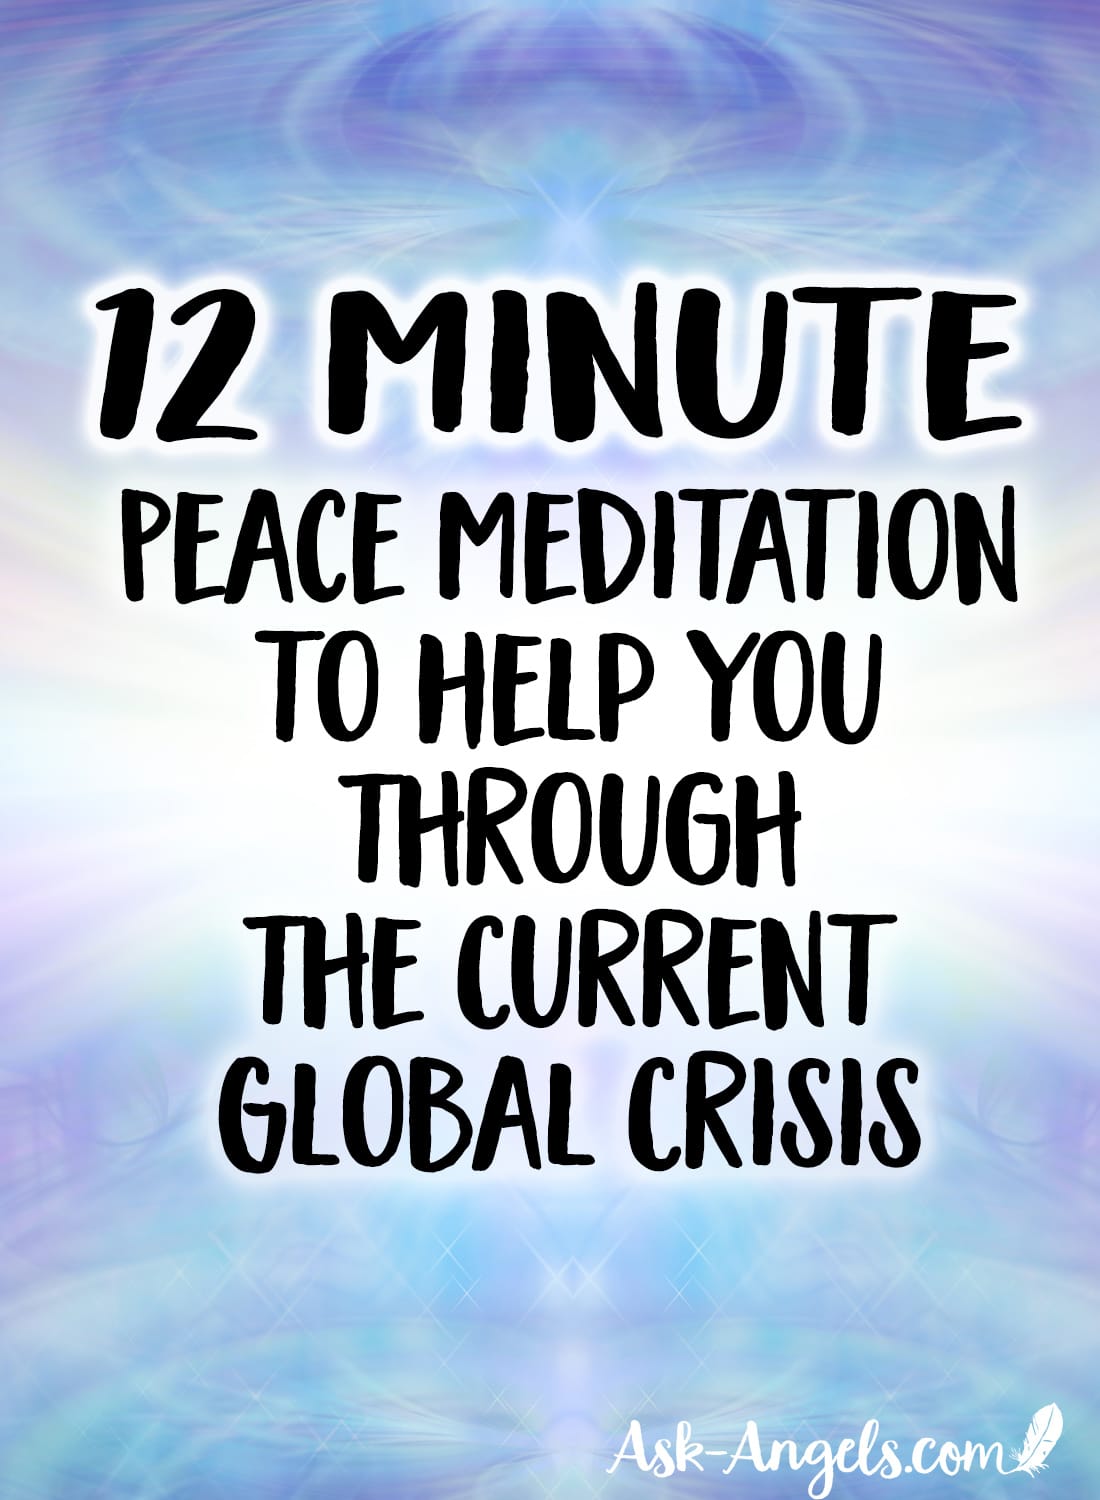 12 Minute Peace Mediation to Help You Through The Current Crisis